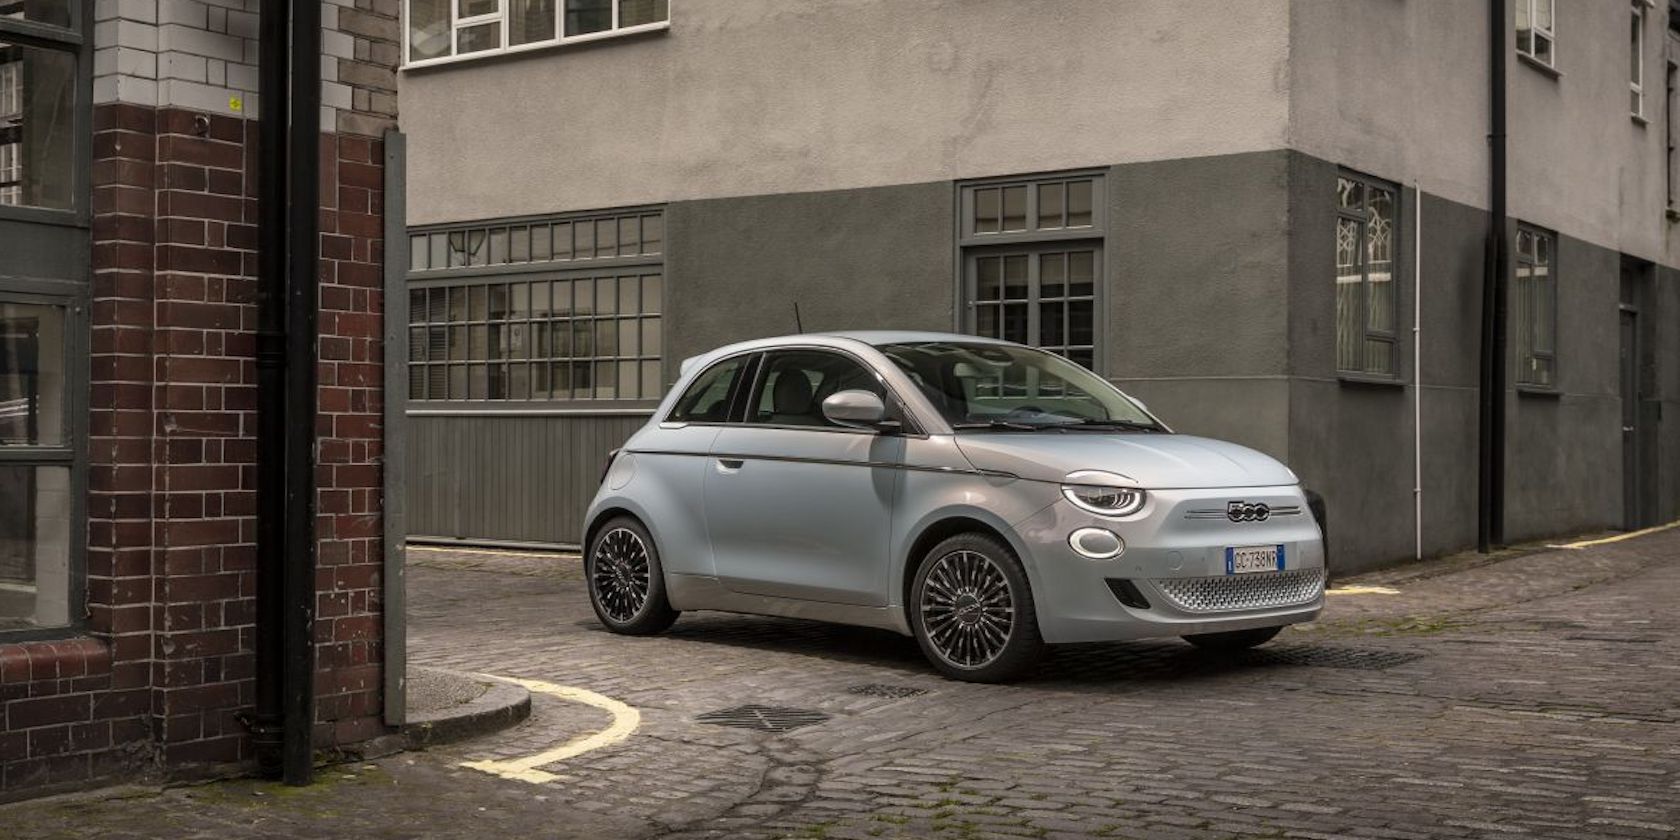 Fiat New 500 electric vehicle